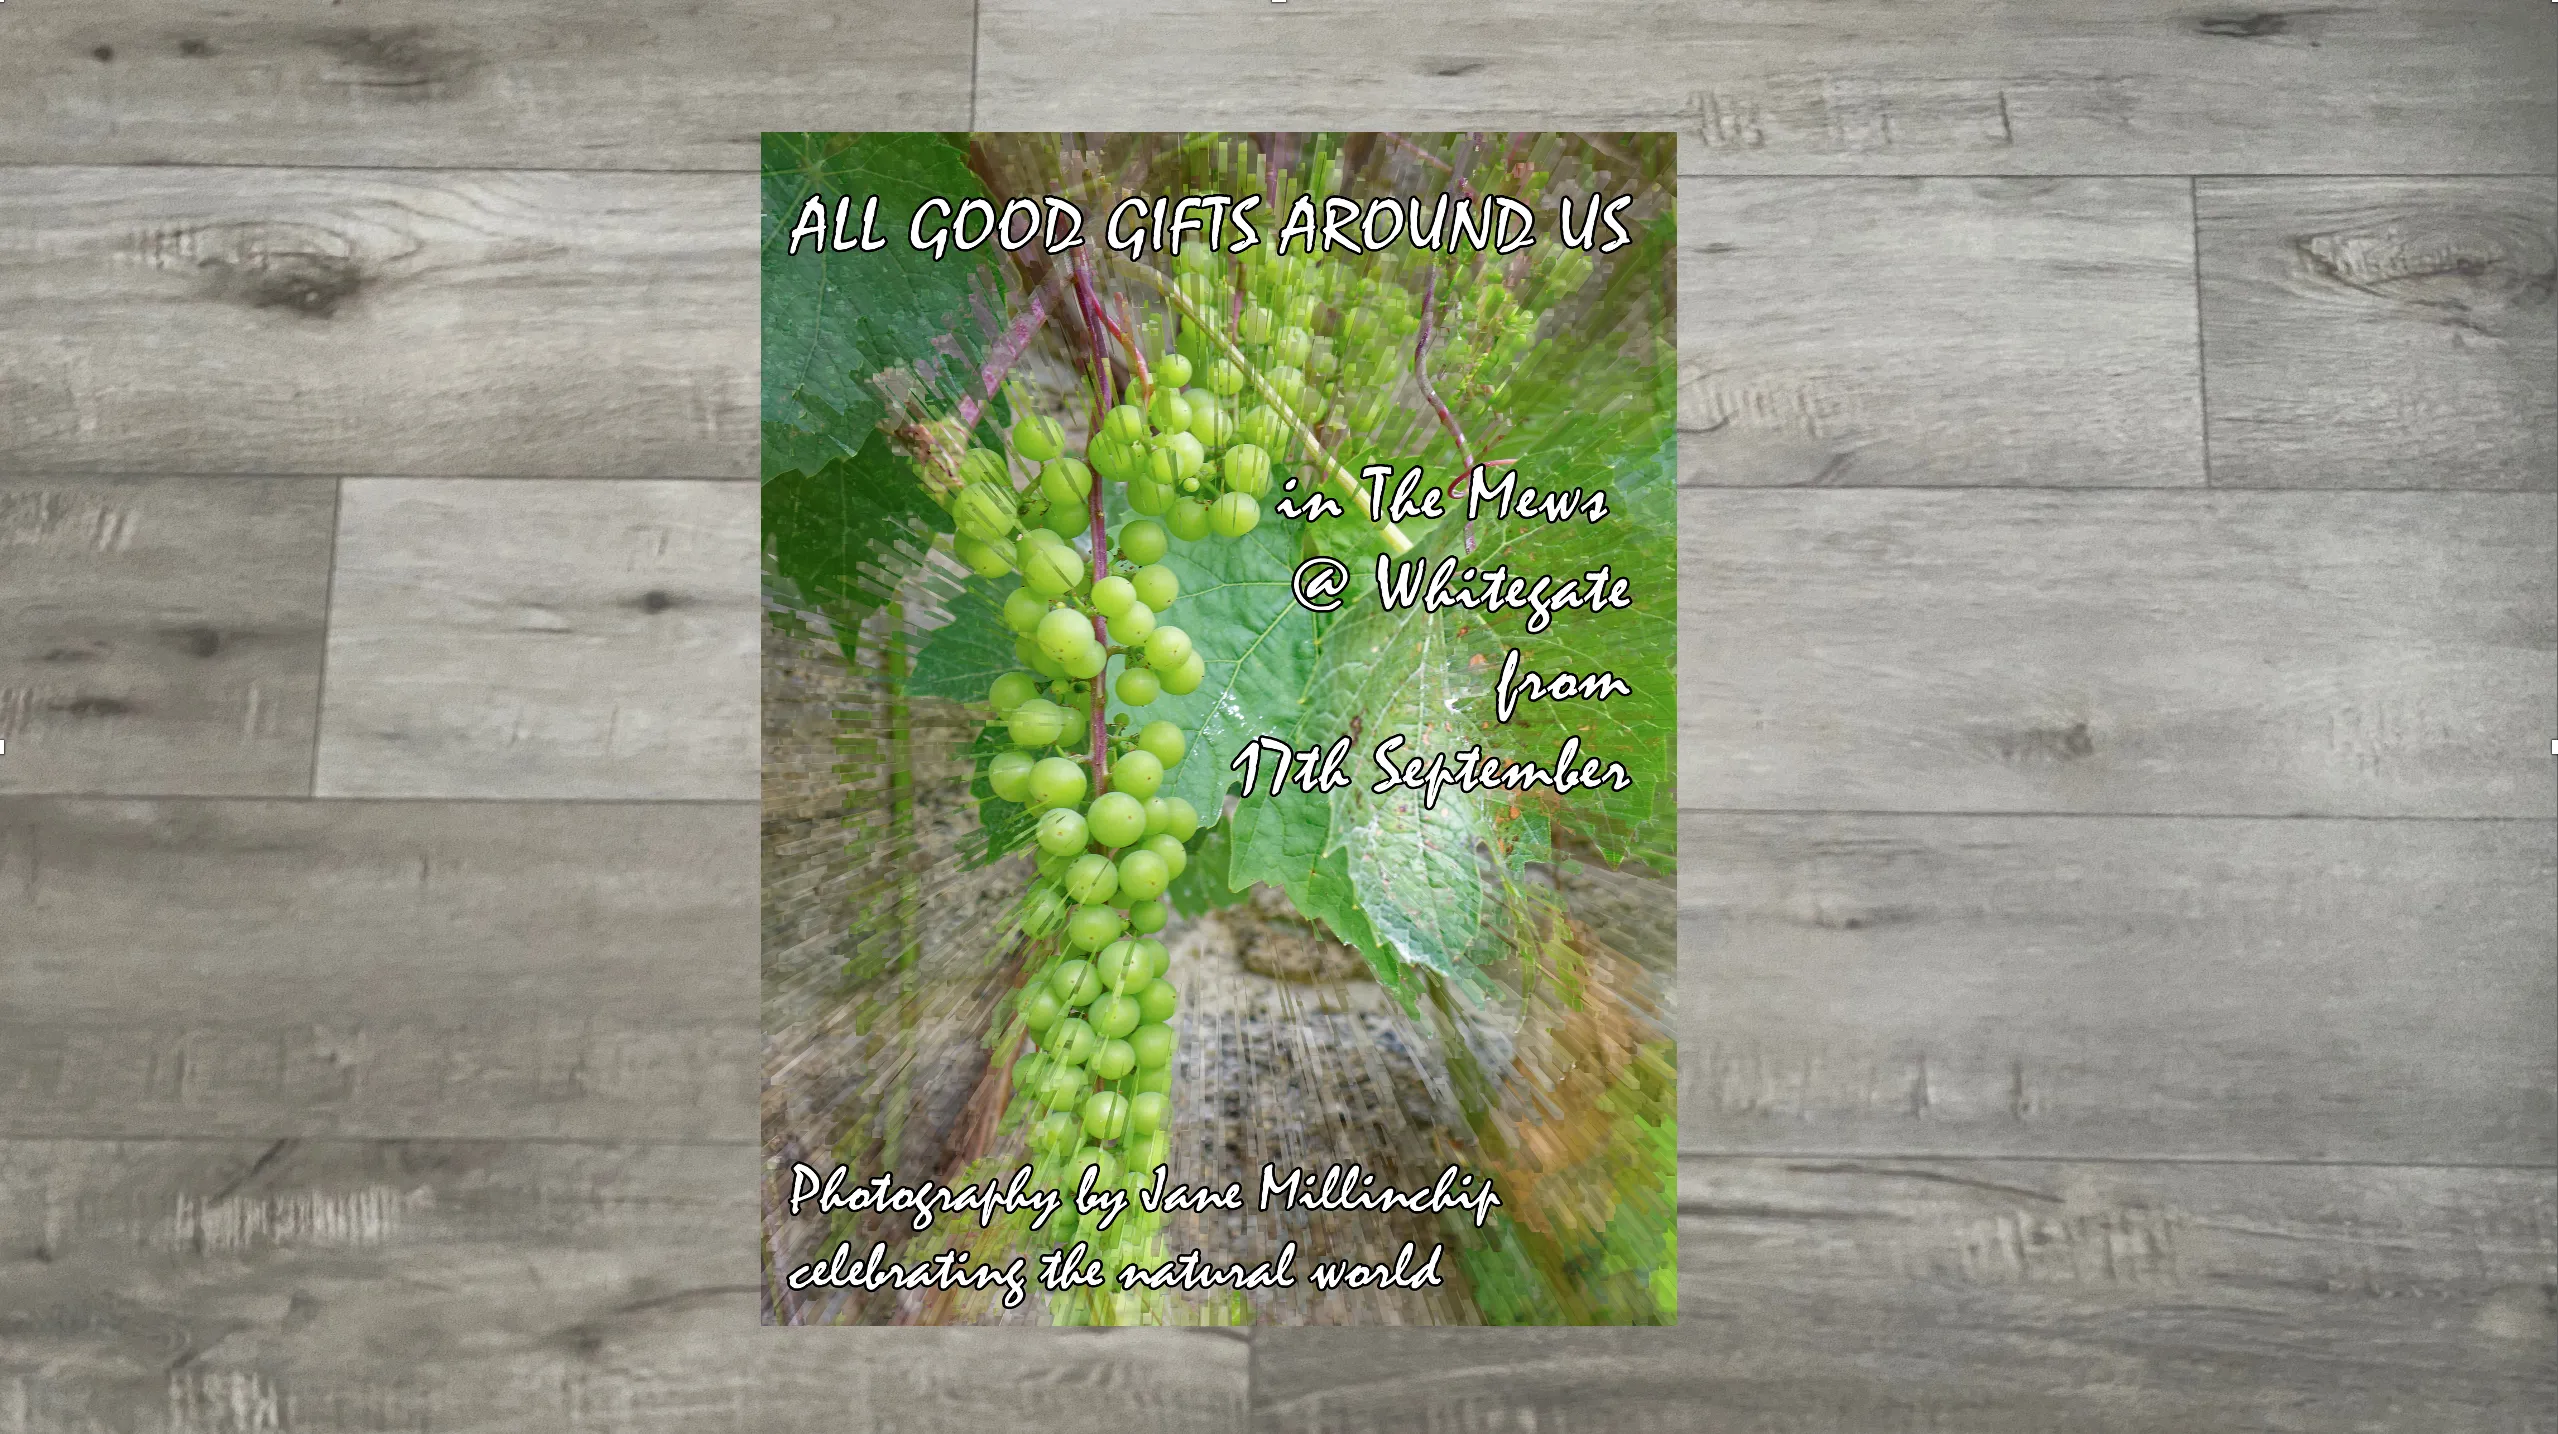 Poster advertising Photographic Exhibition with bunch of grapes.